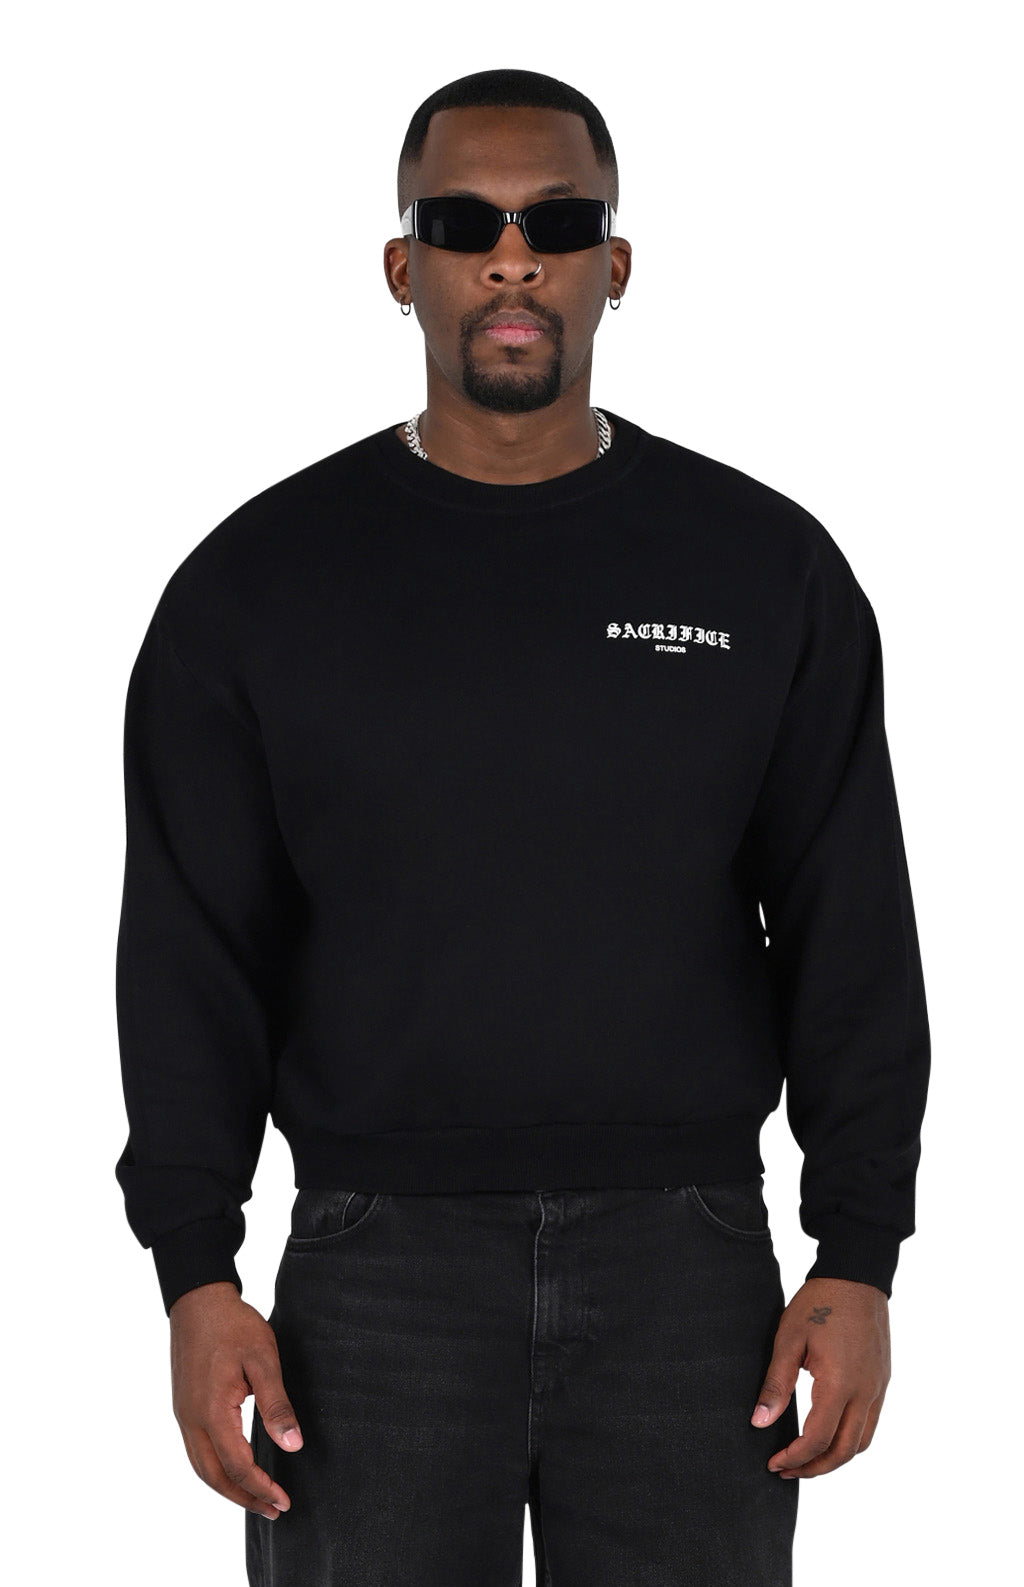 Premium Streetwear Heavy-weight Sweatshirt. Expertly crafted in Portugal. Located in Dubai.